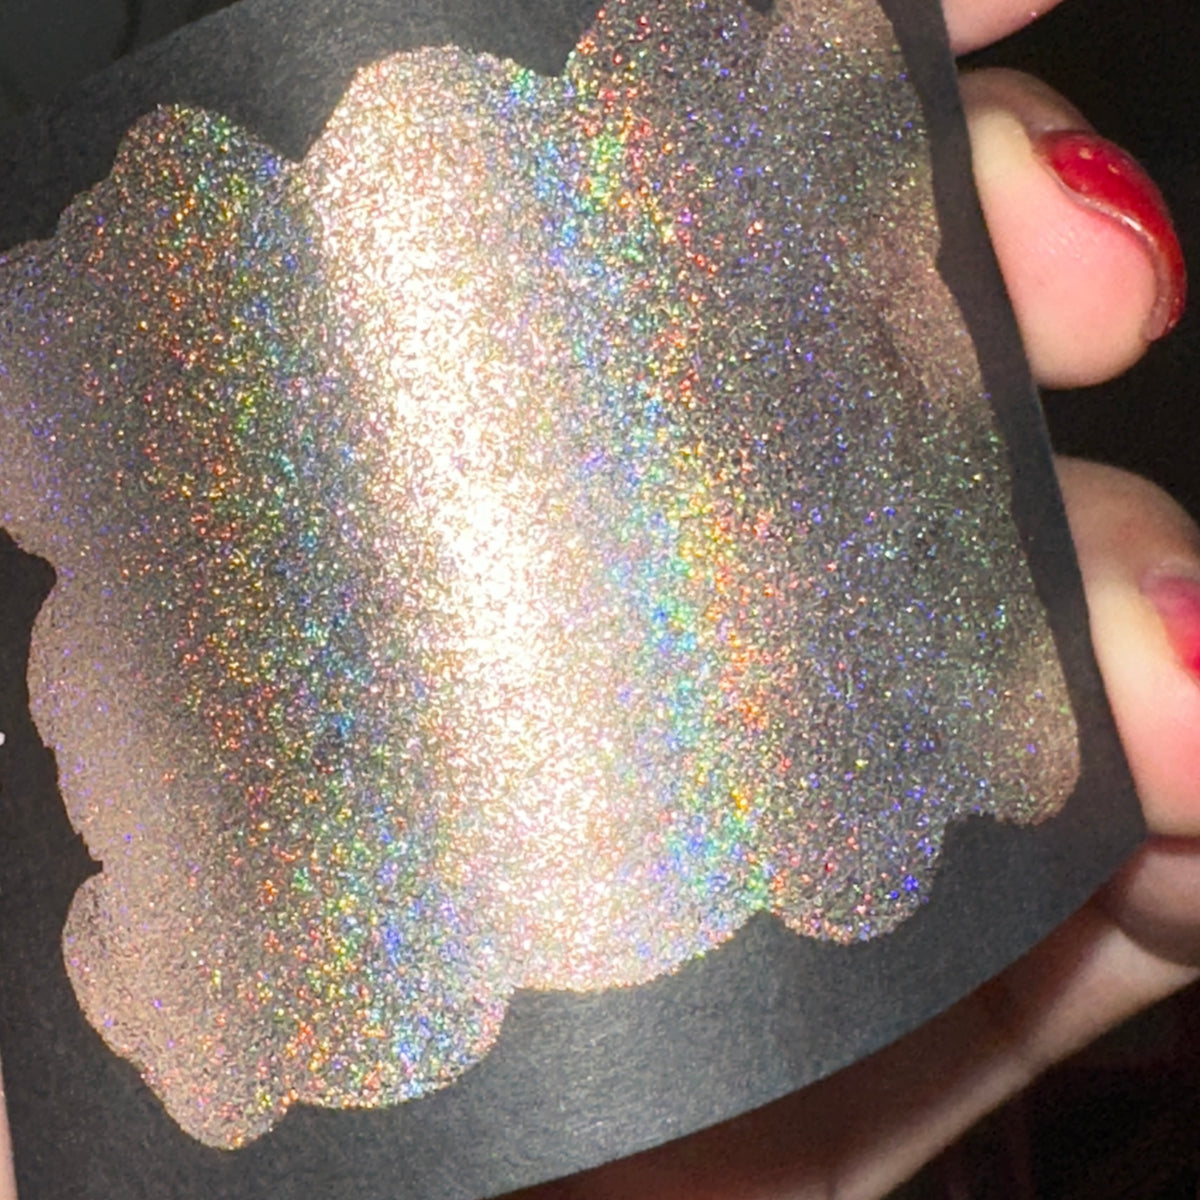 Quarter Moonlight Night Series Handmade Glittery Hologram shimmer  watercolor Paint by iuilewatercolors